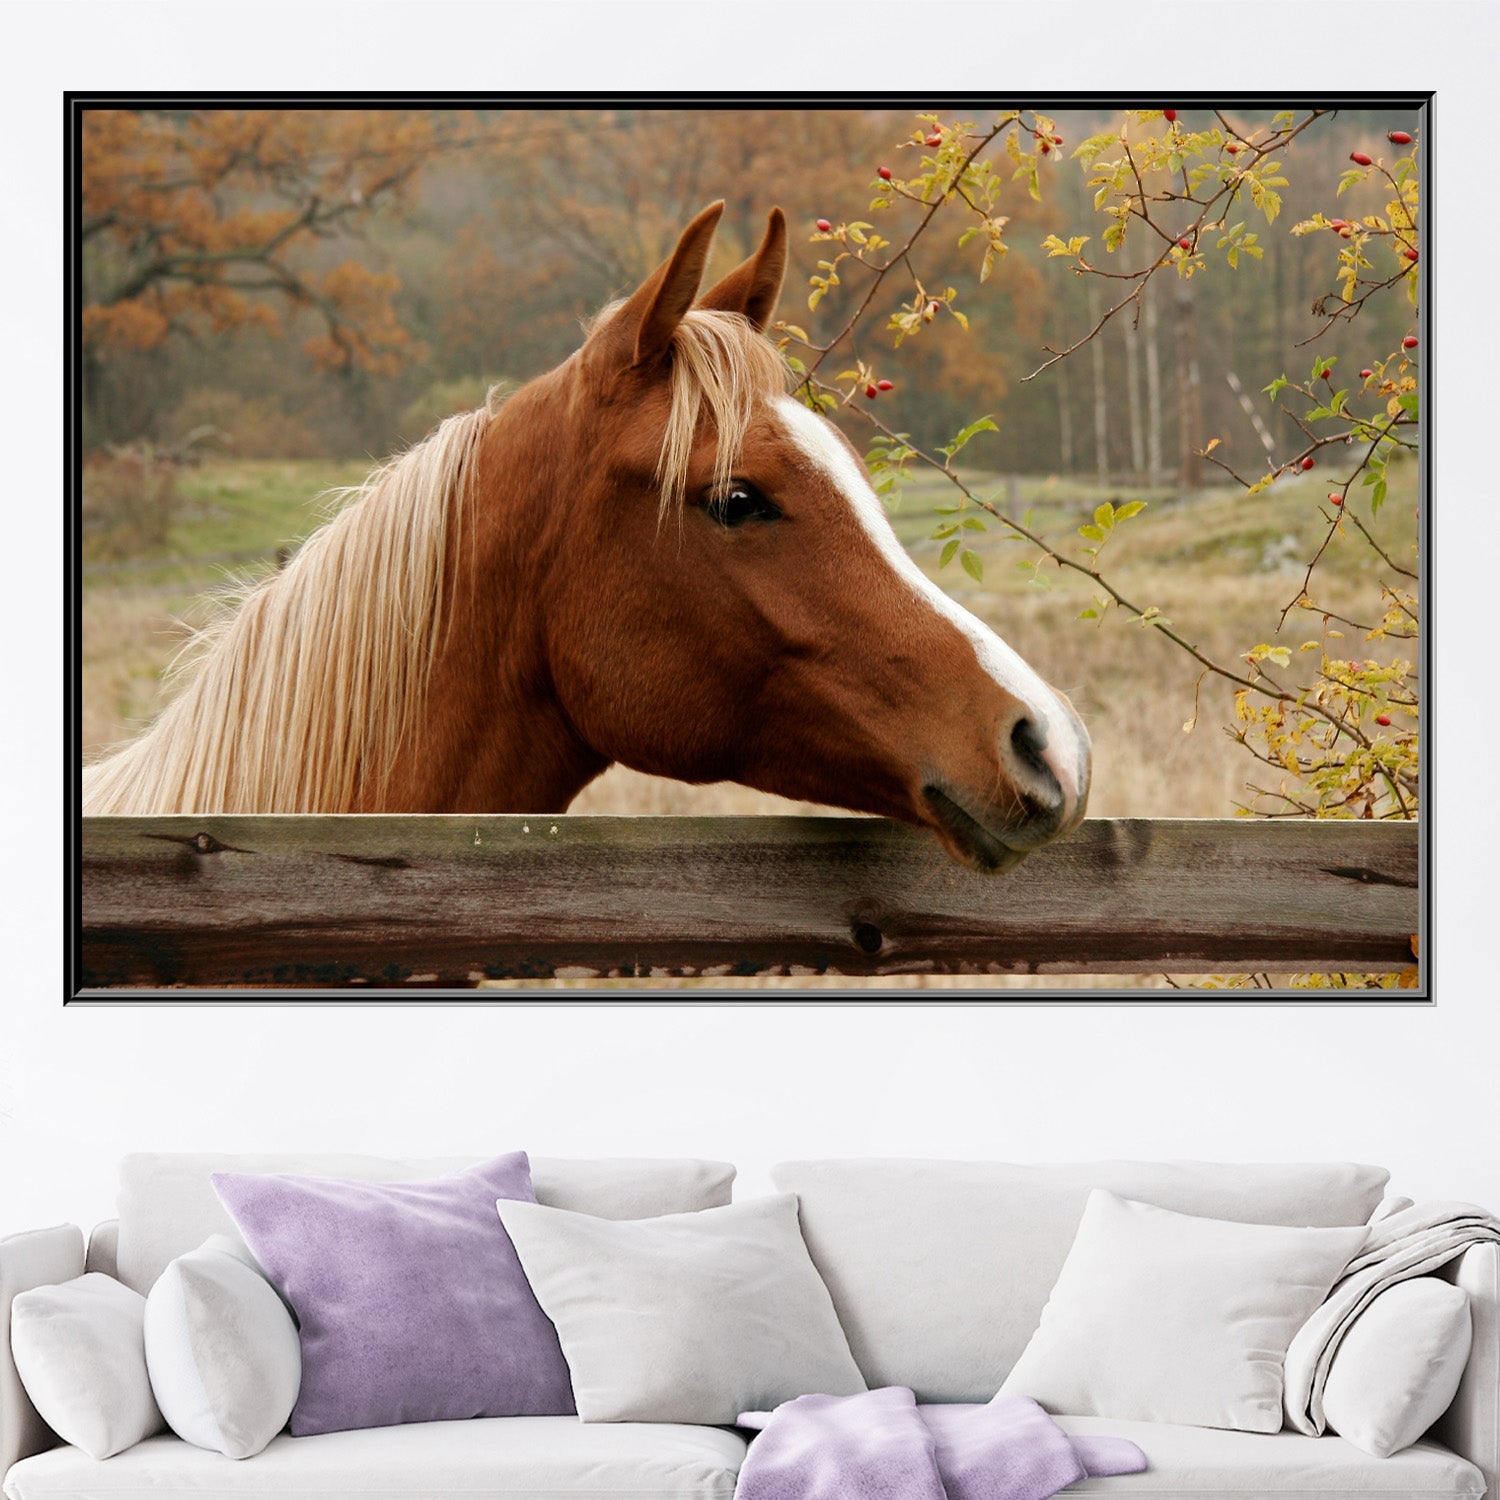 https://cdn.shopify.com/s/files/1/0387/9986/8044/products/CountryHorseCanvasArtprintStretched-3.jpg